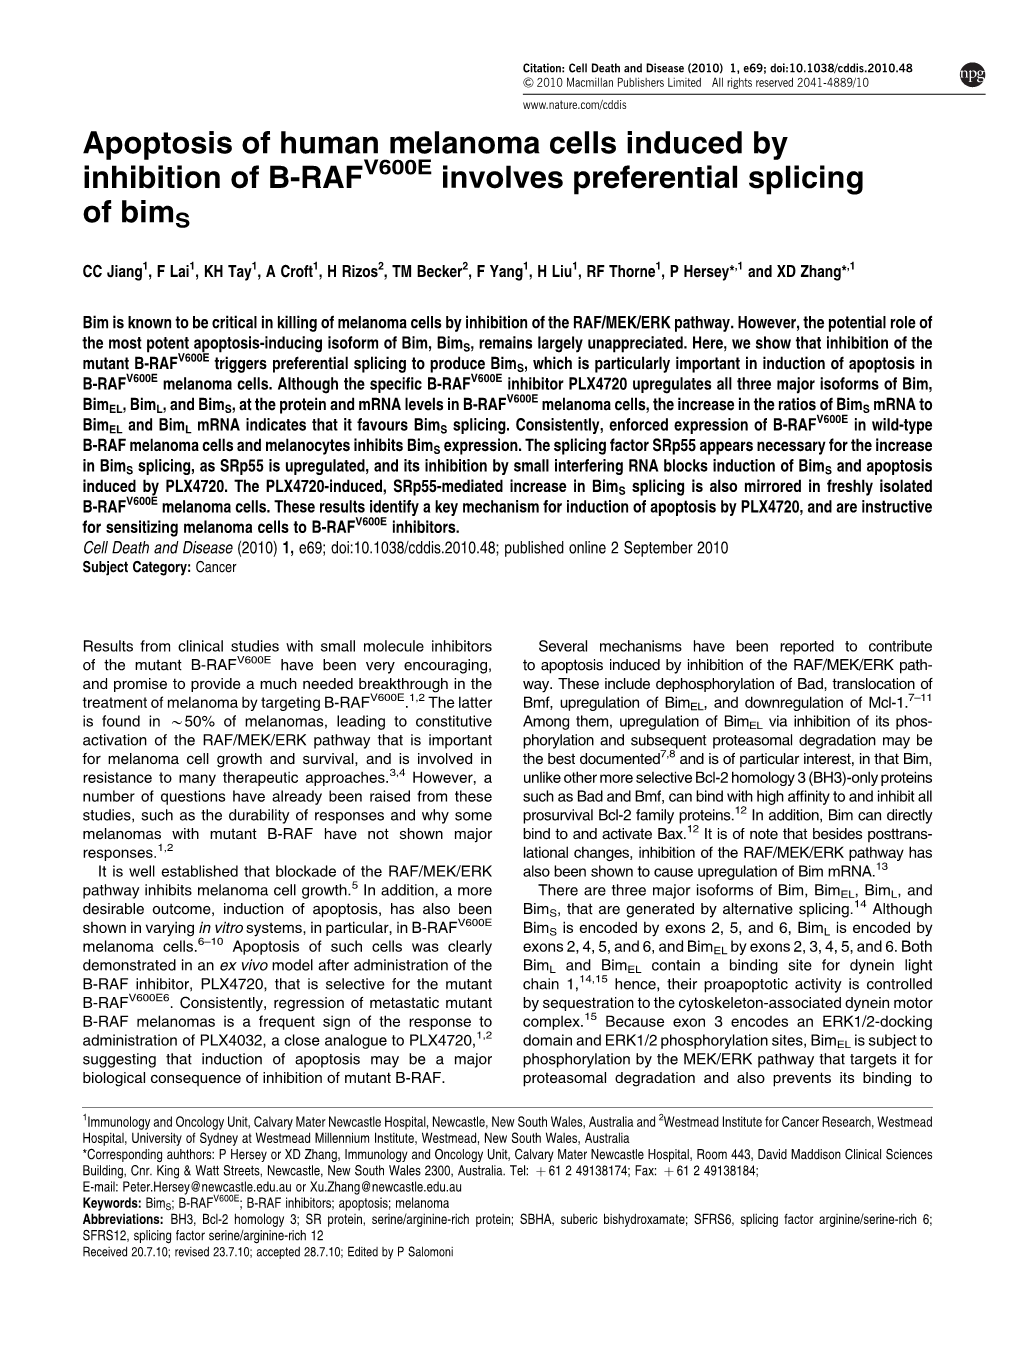 Apoptosis of Human Melanoma Cells Induced by Inhibition of B-RAFV600E Involves Preferential Splicing of Bims